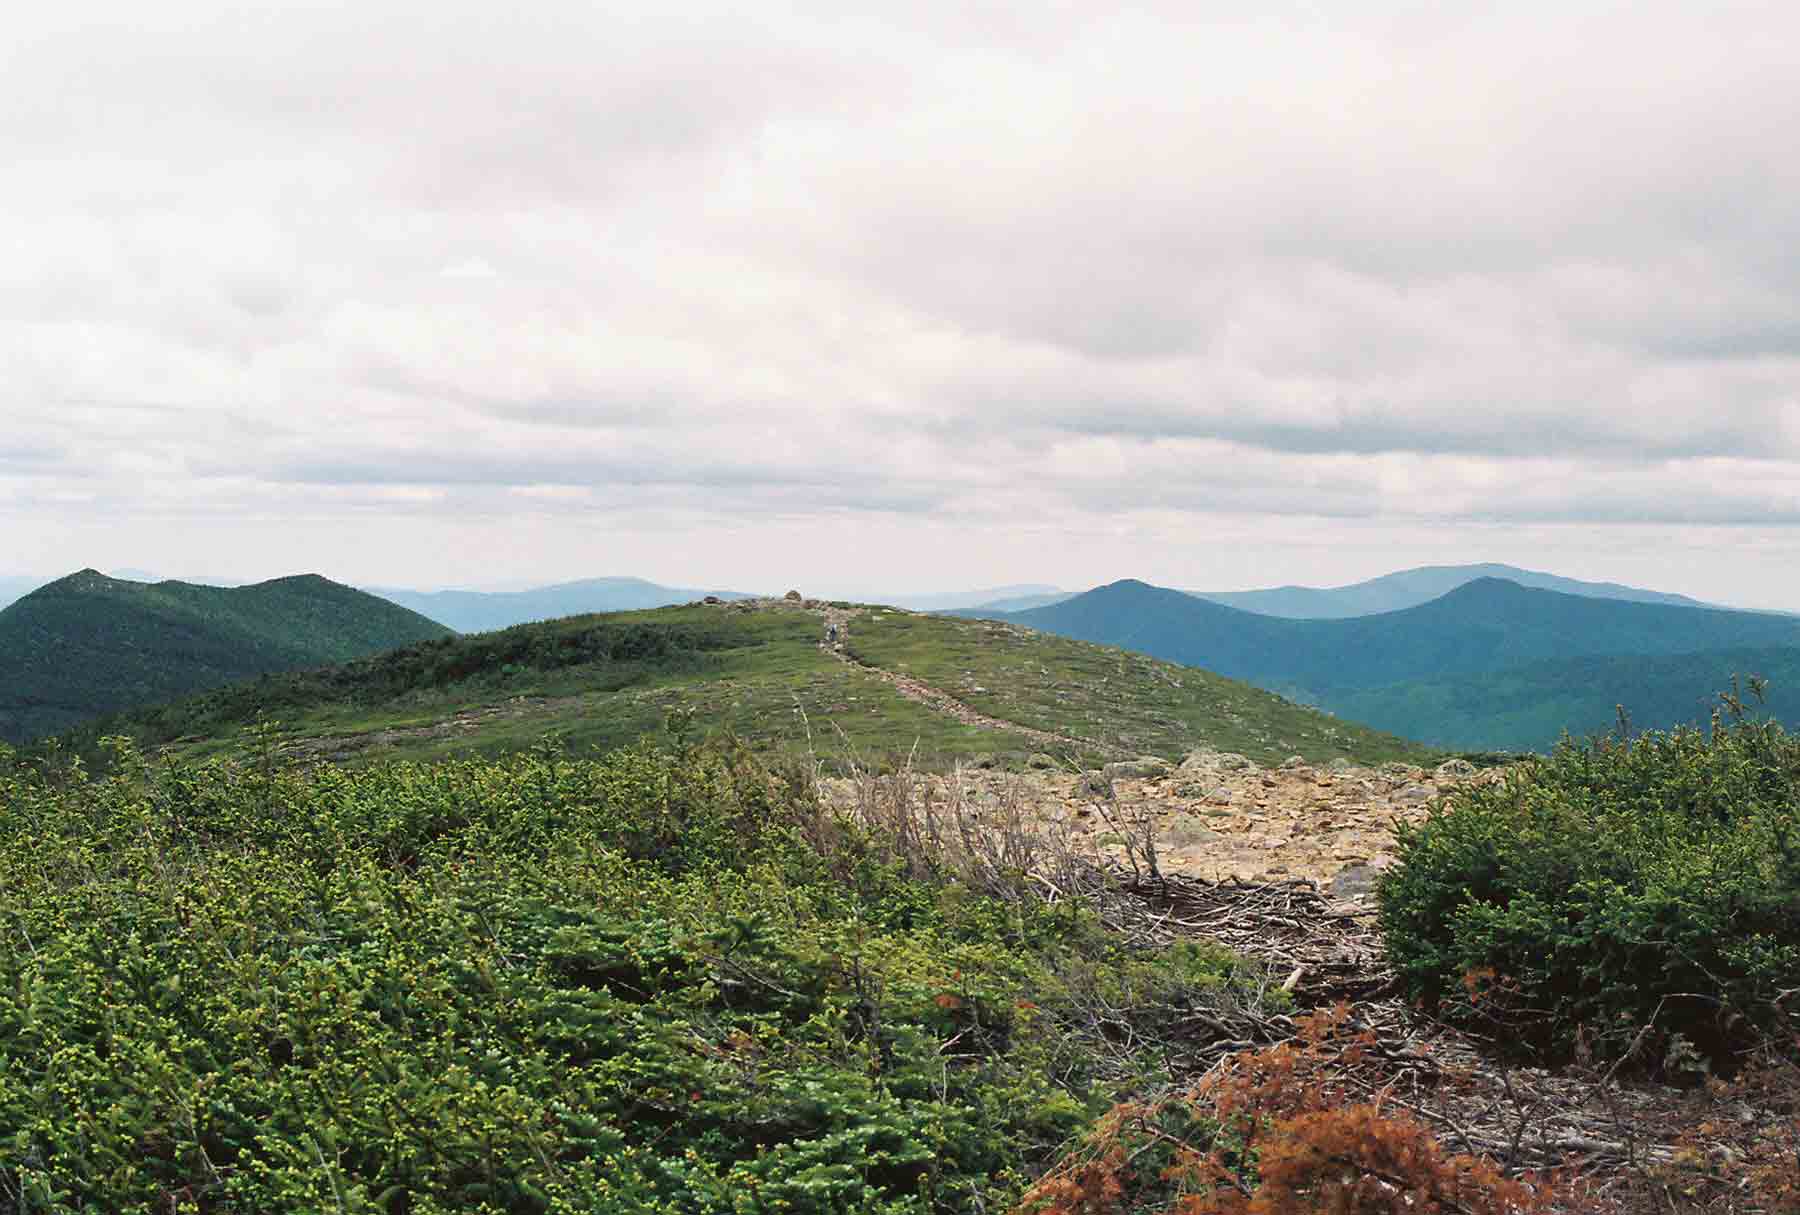 mm 11.9 - View south from near the summit of Mt. Guyot.  Courtesy dlcul@conncoll.edu